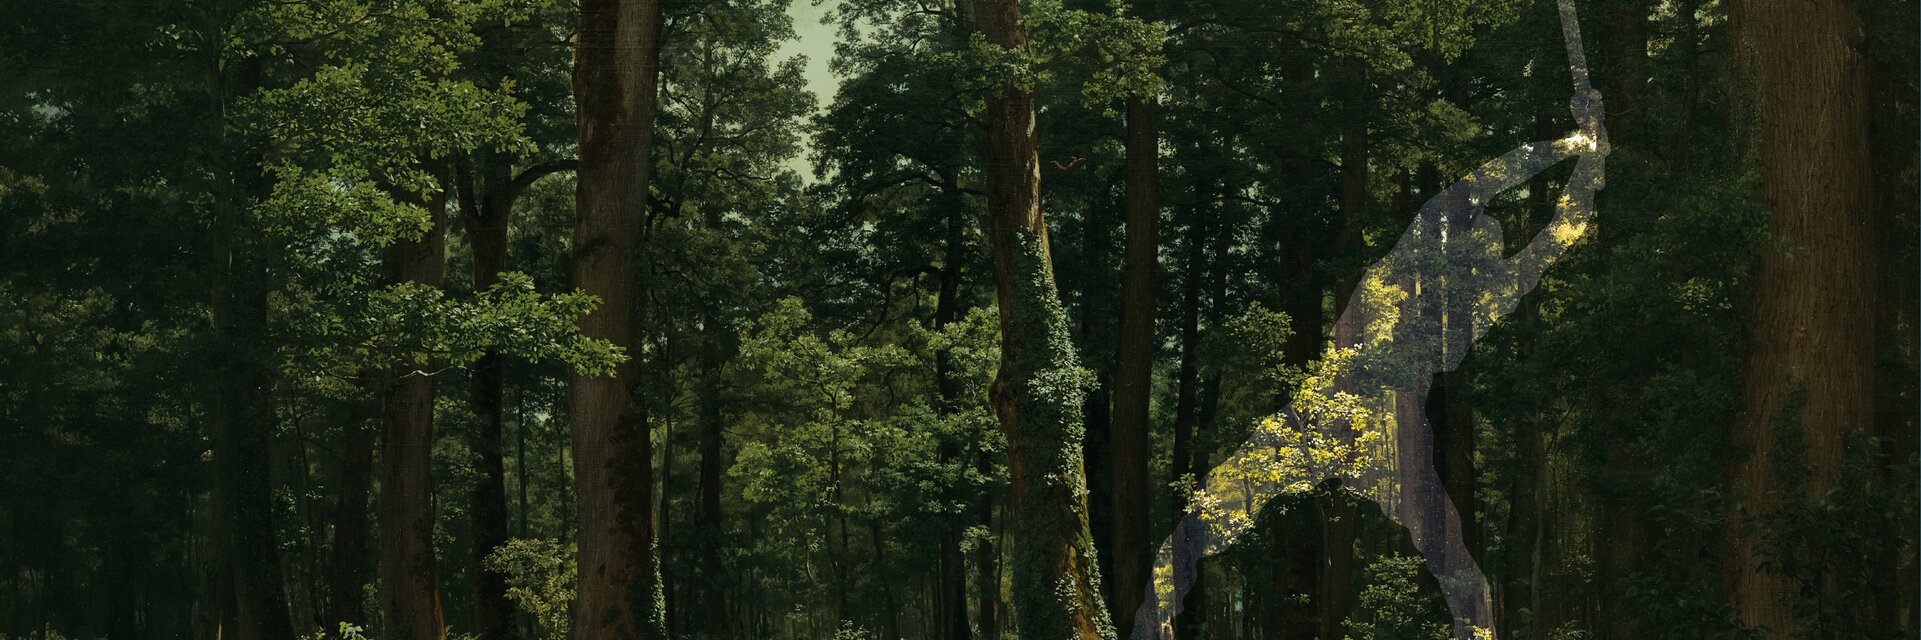 Key visual of the exhibition "In the forest